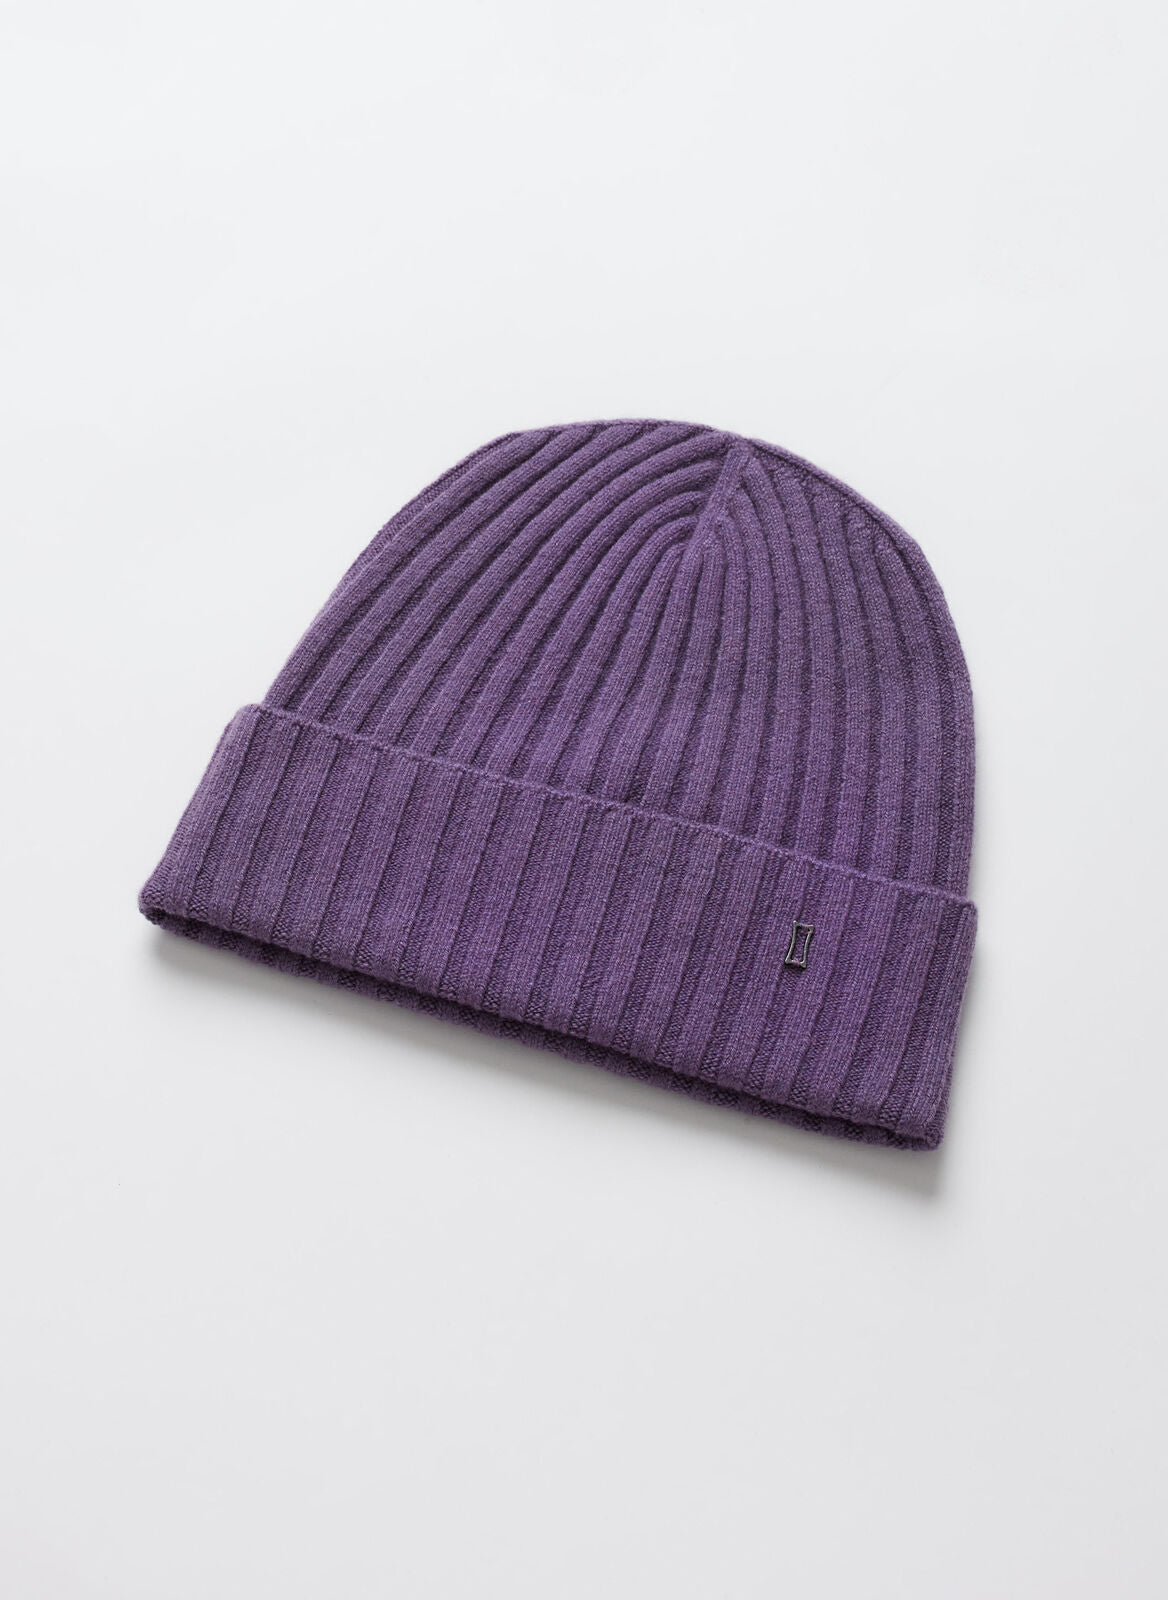 Kit and Ace — Burbank Cashmere Toque